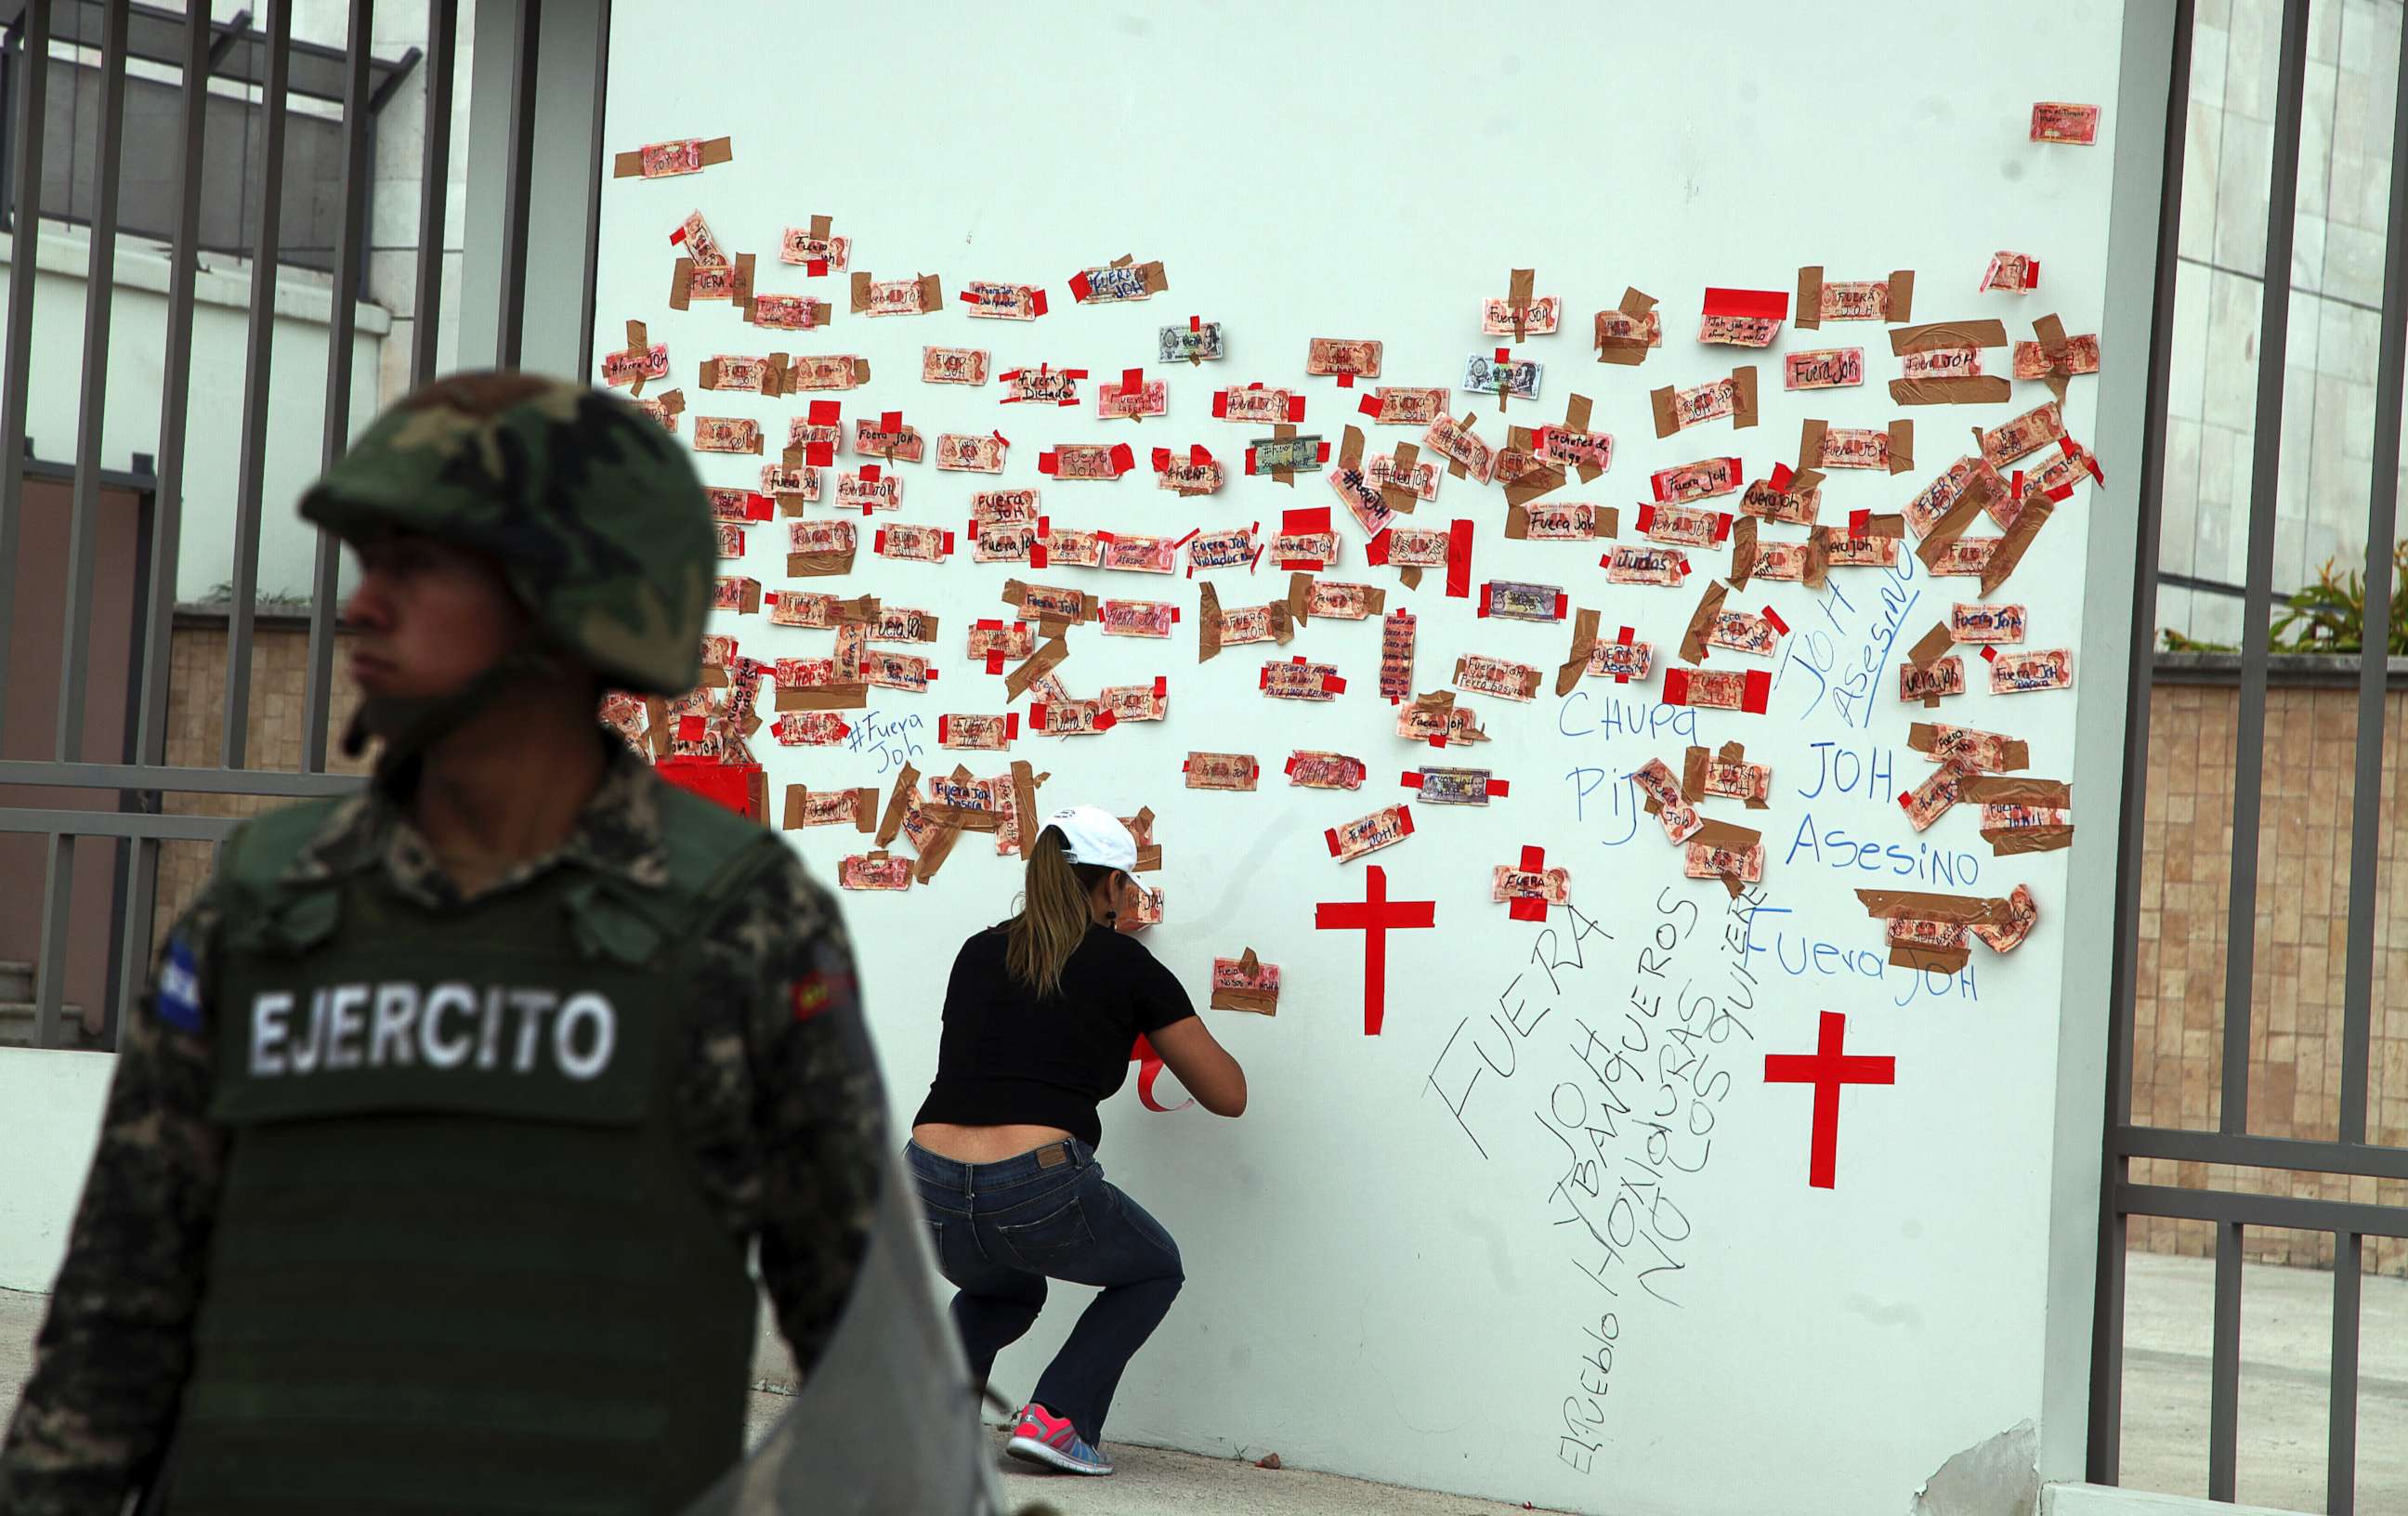 PHOTO: A protester tapes Honduran money inscribed with political slogans alongside crosses representing people killed in post-election violence, on the outside of the central bank in Tegucigalpa, Honduras, Jan. 7, 2018.